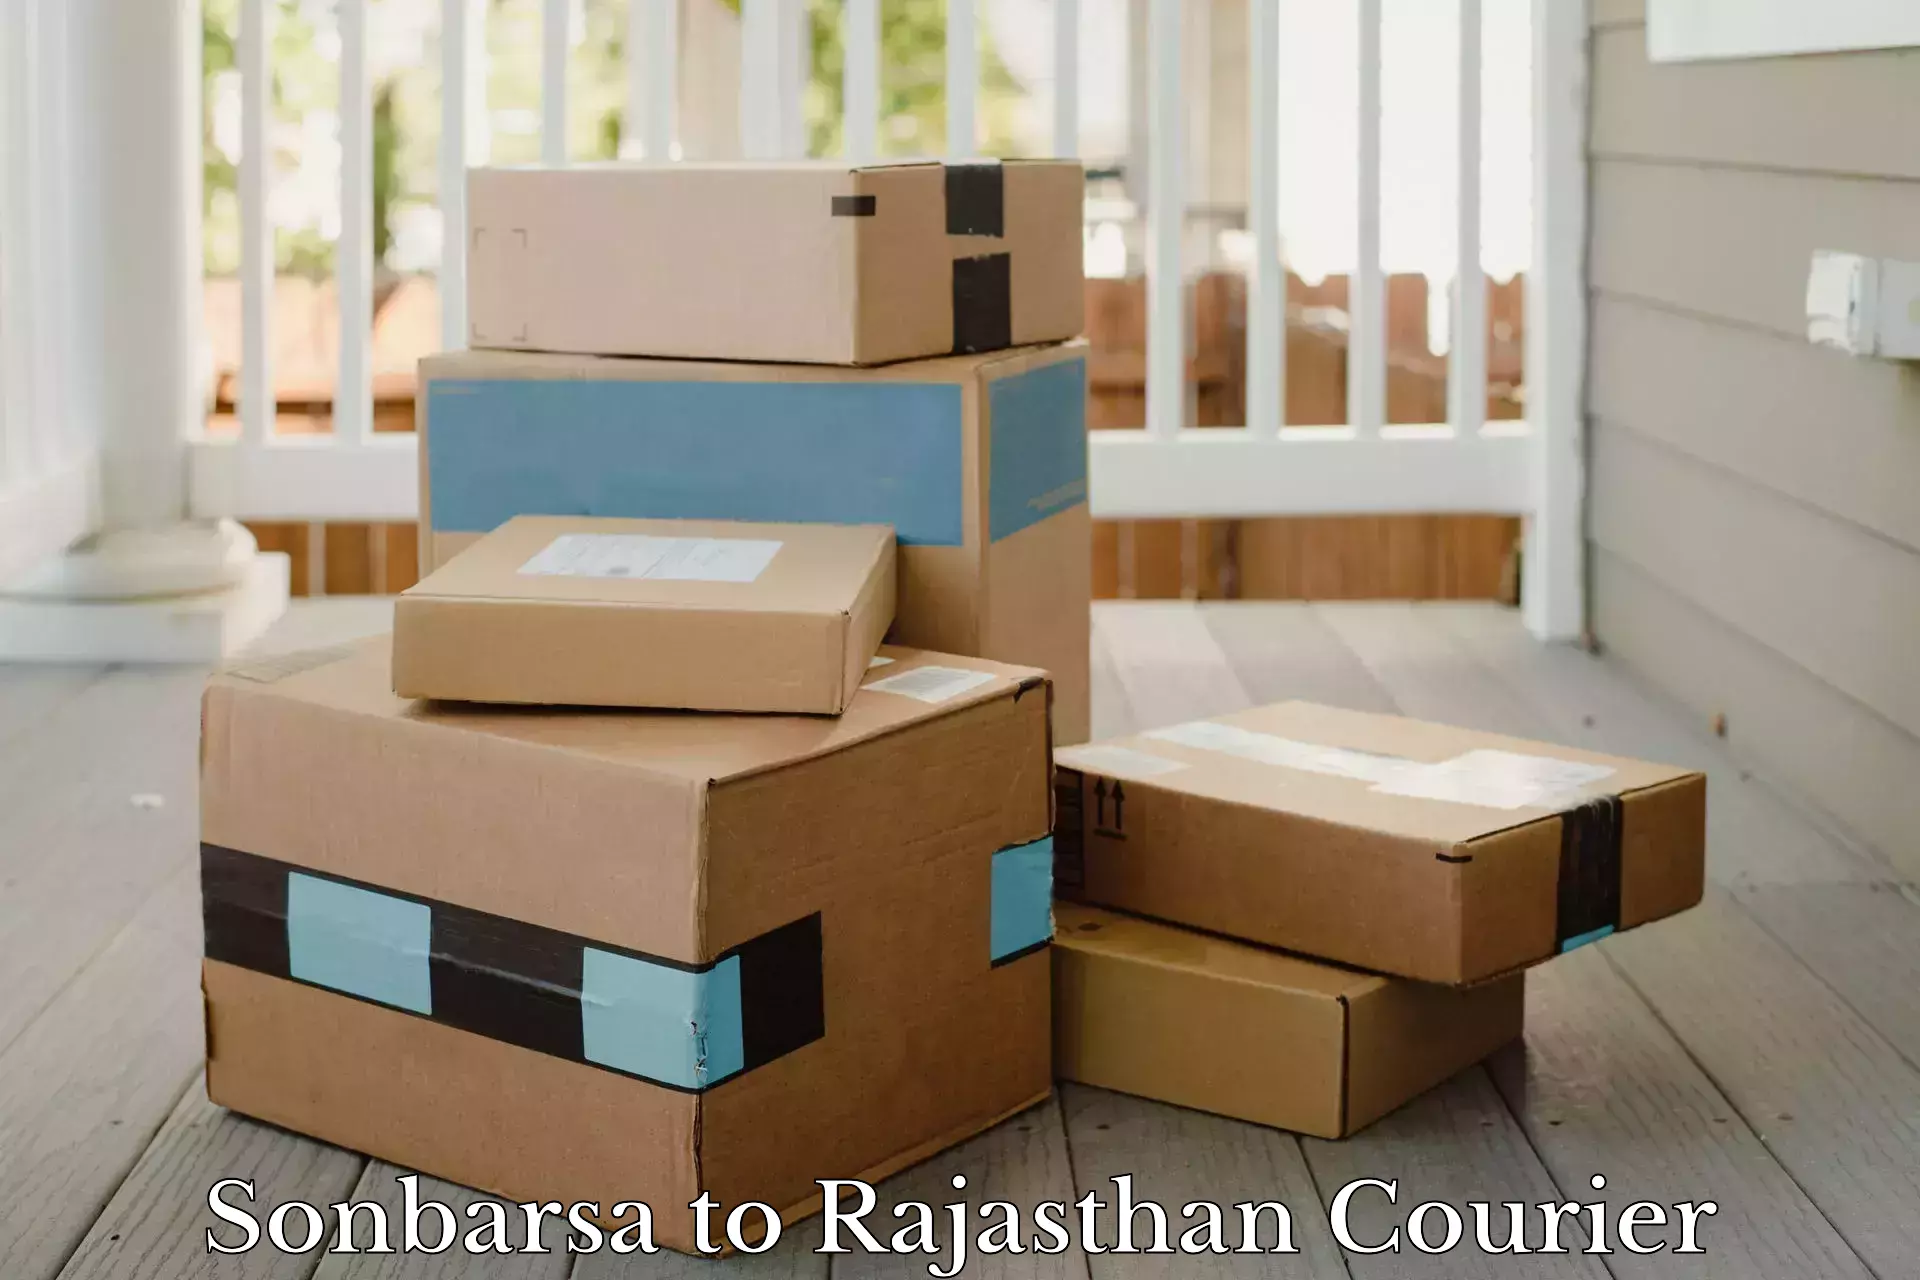 Speedy delivery service in Sonbarsa to Rajasthan